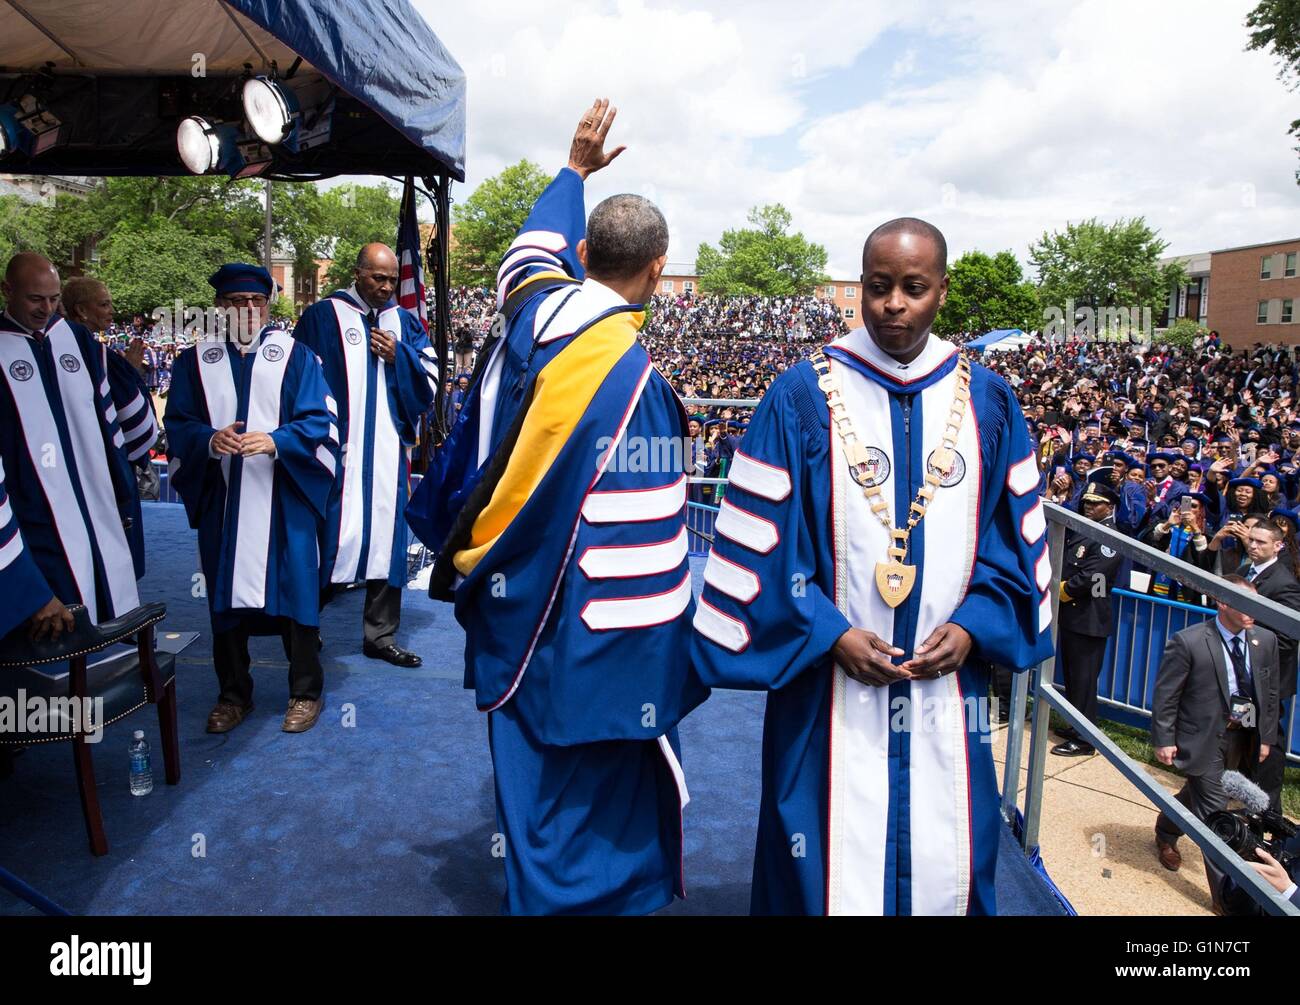 U.S President Barack Obama departs the stage with Dr. Wayne Frederick, Howard University President, after delivering the commencement address during the class of 2016 graduation ceremony at Howard University May 7, 2016 in Washington, D.C. Stock Photo